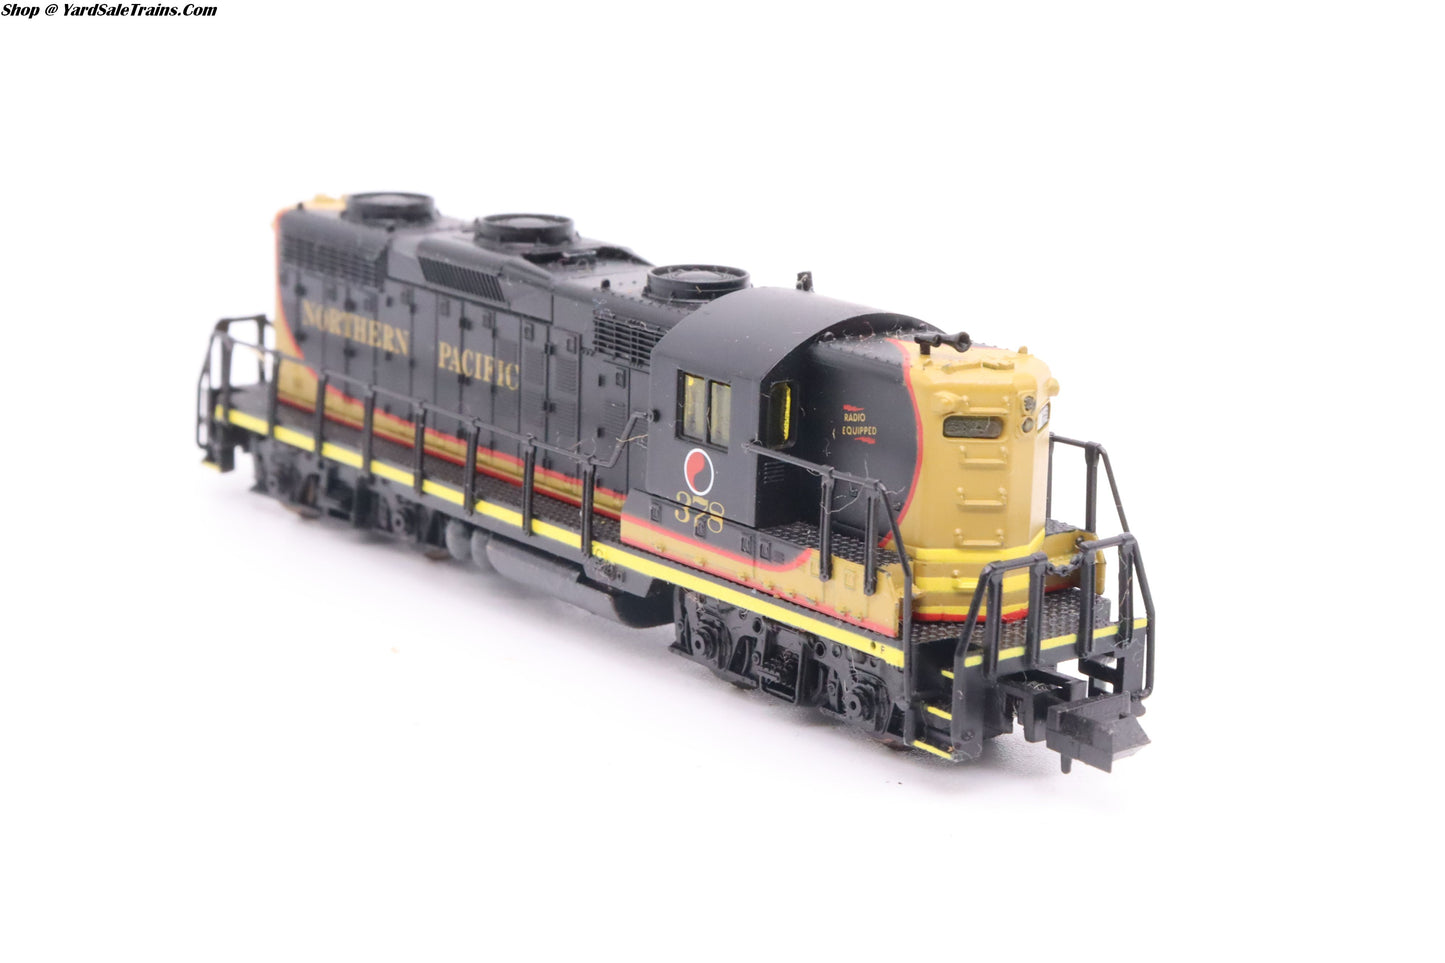 LL-7115 - GP18 Locomotive - Northern Pacific - NP #378 - N Scale - Preowned